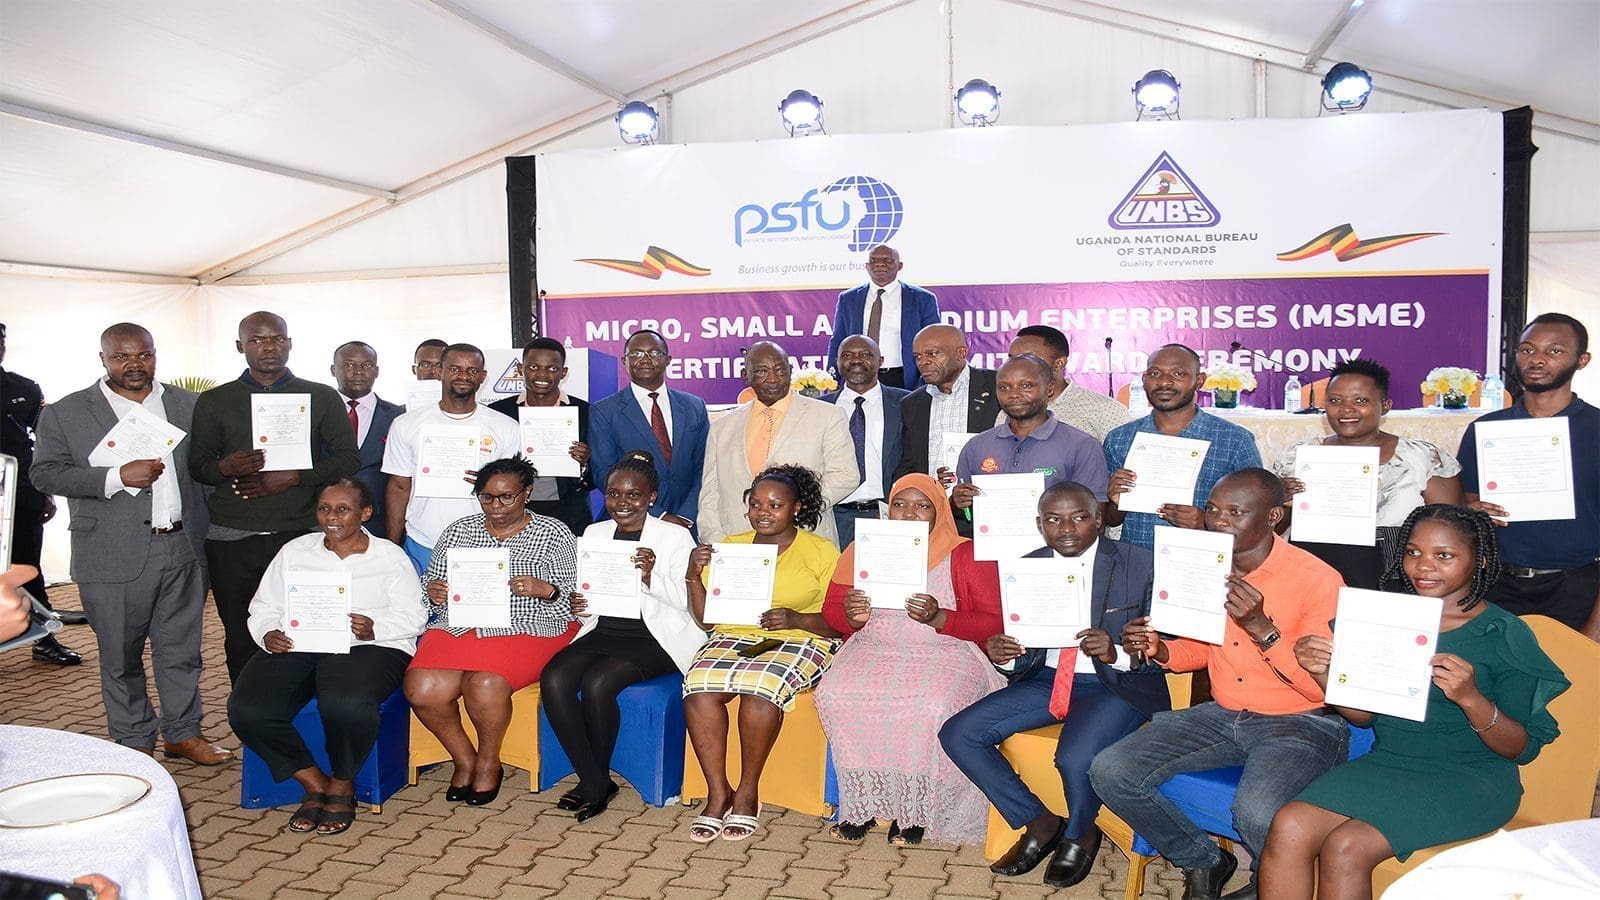 UNBS issues free certification to over 500 MSMEs